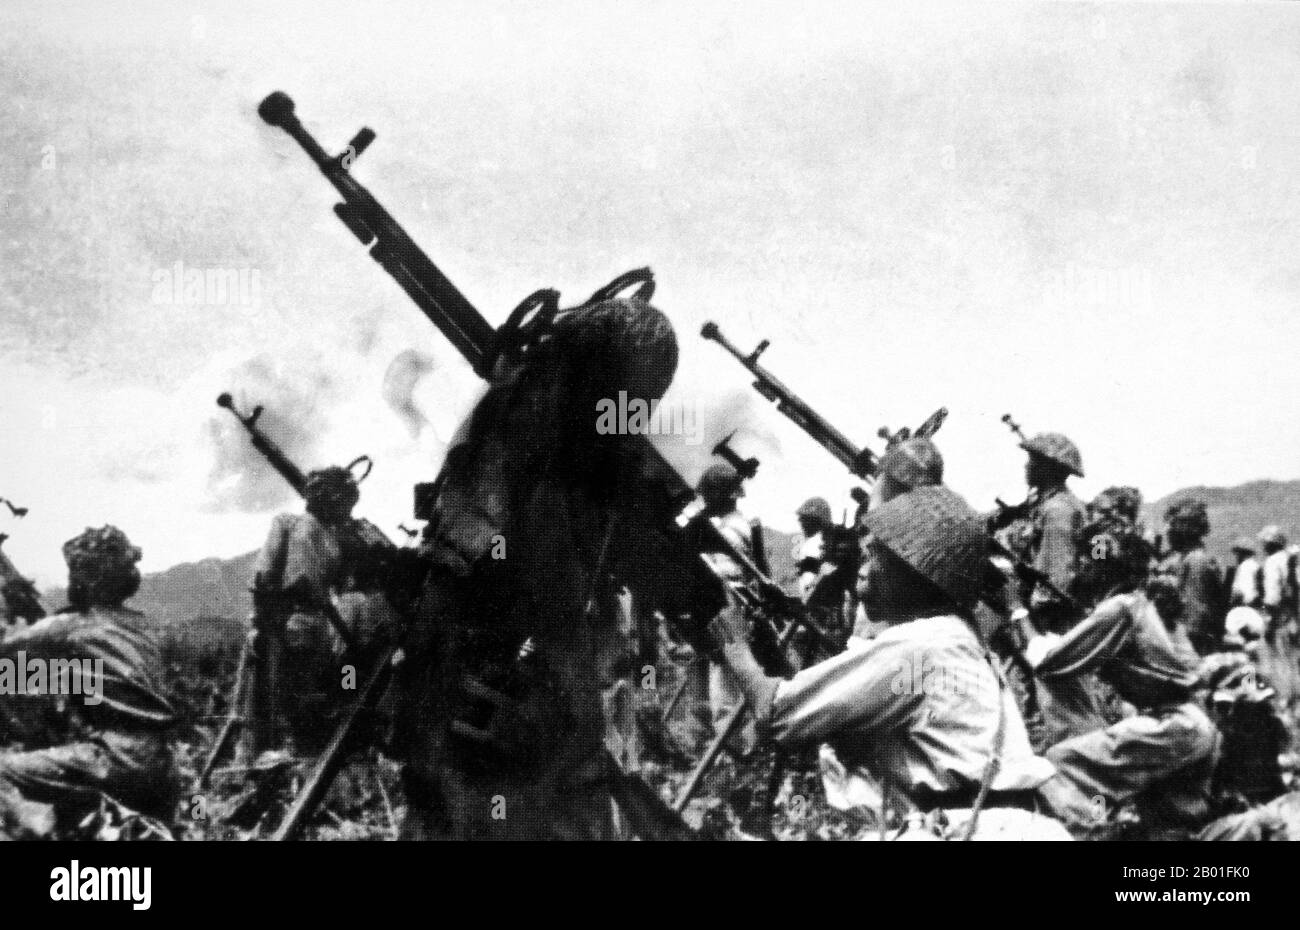 Vietnam: Viet Minh 308 Division unleashes a barrage of 12.7mm anti-aircraft fire at French planes, Dien Bien Phu, 1954.  The important Battle of Dien Bien Phu was fought between the Việt Minh (led by General Vo Nguyen Giap), and the French Union (led by General Henri Navarre, successor to General Raoul Salan). The siege of the French garrison lasted fifty-seven days, from 5:30 PM on March 13 to 5:30 PM on May 7, 1954.  The southern outpost or fire base of the camp, Isabelle, did not follow the cease-fire order and fought until the next day at 01:00 AM. Stock Photo